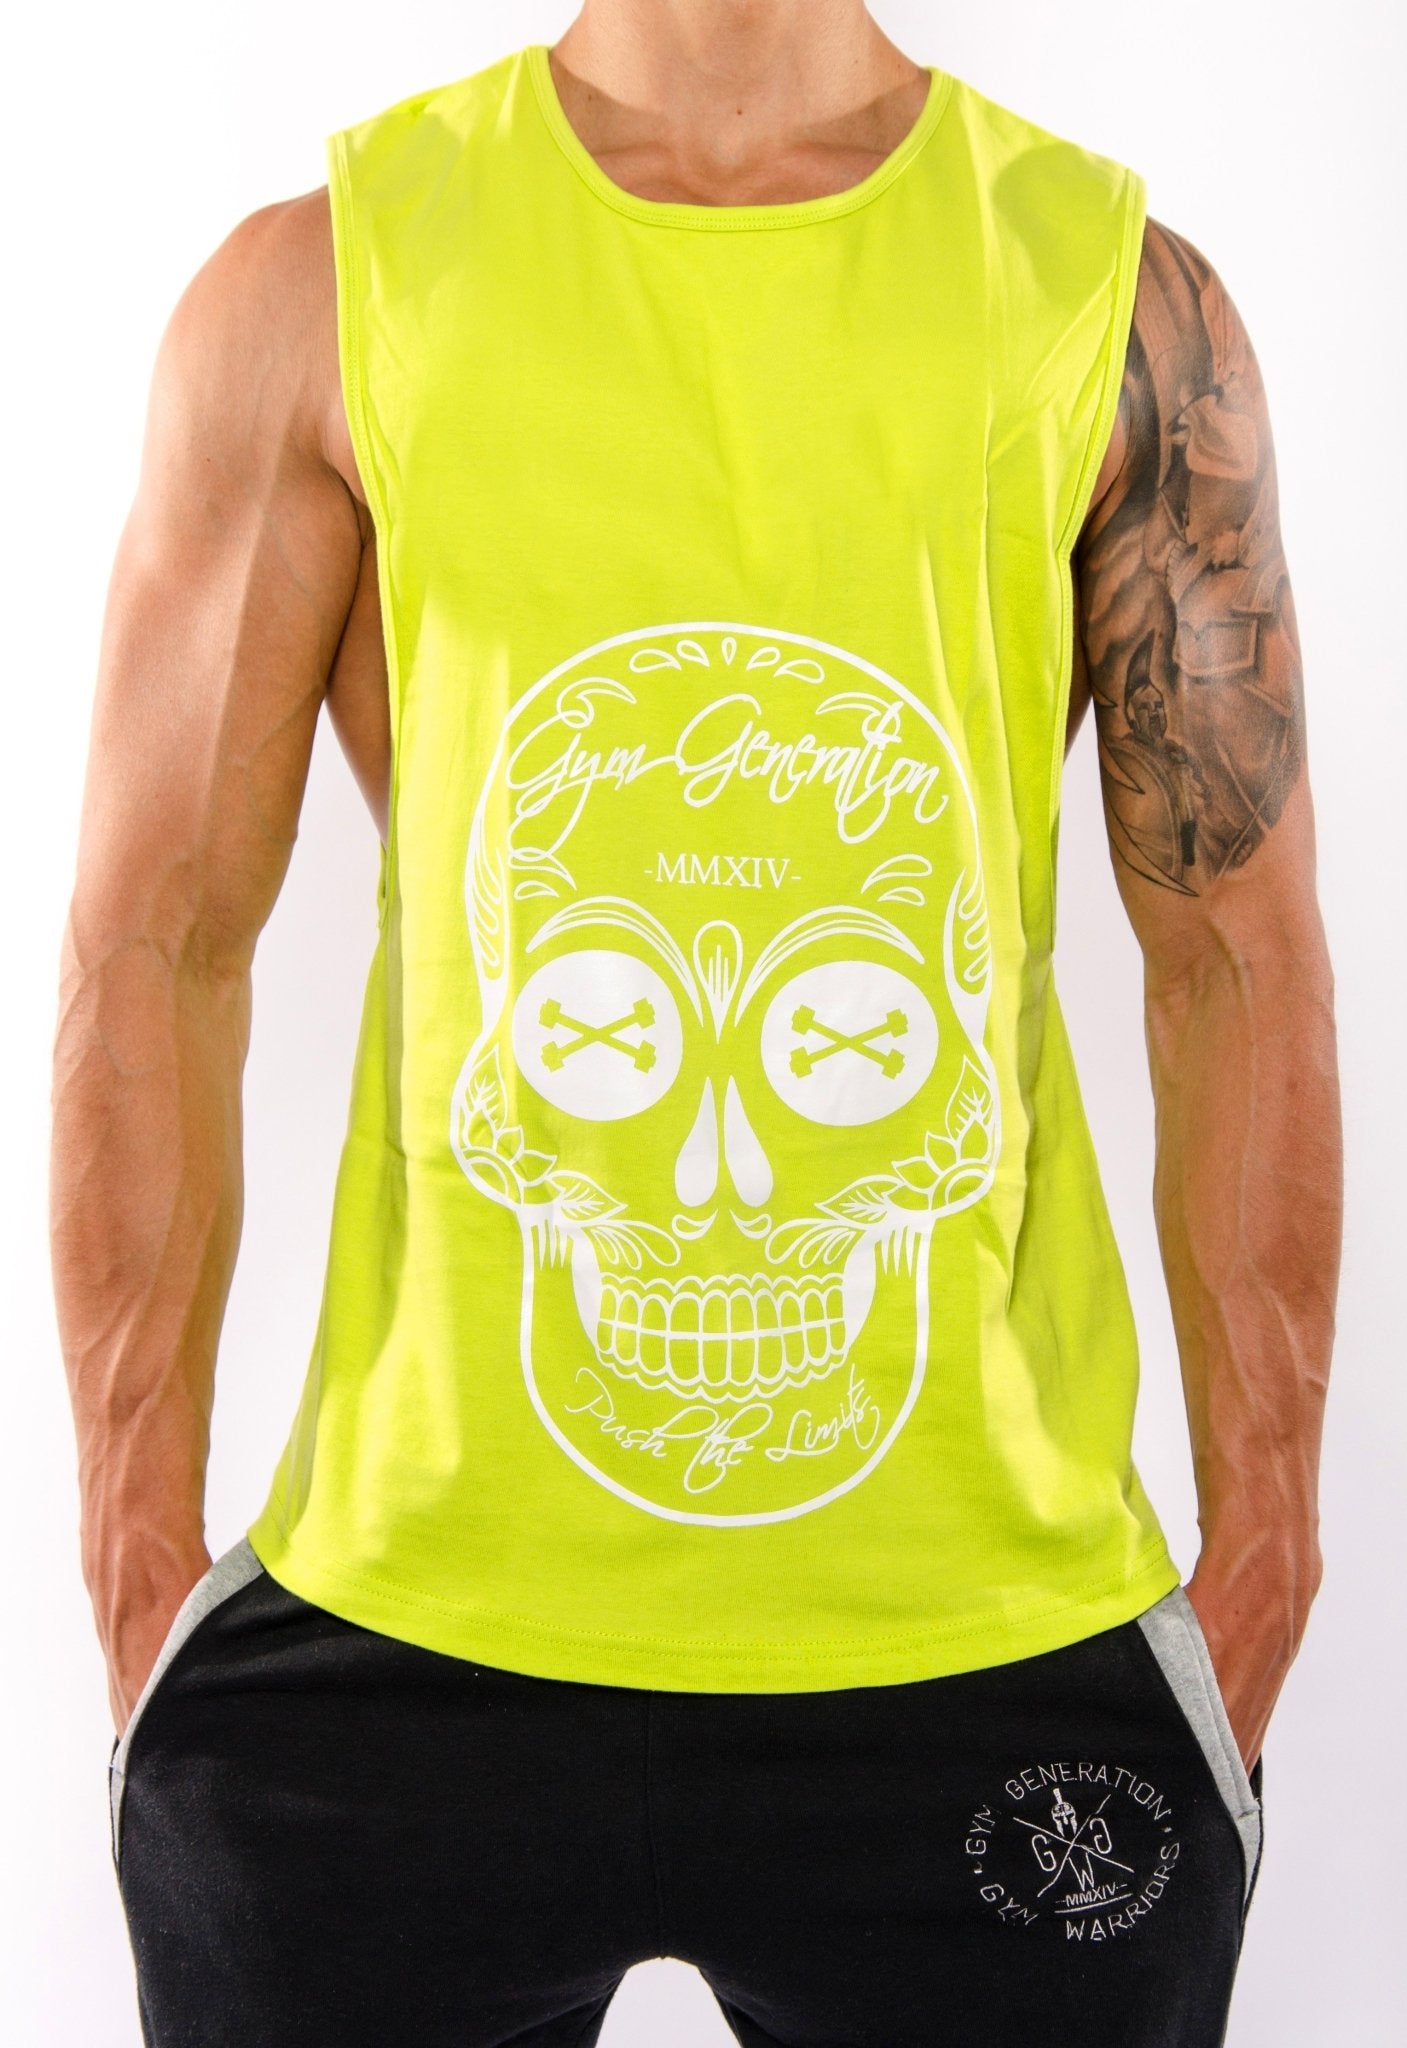 La Catrina Muscle Tank Top - Lime - Gym Generation®--www.gymgeneration.ch